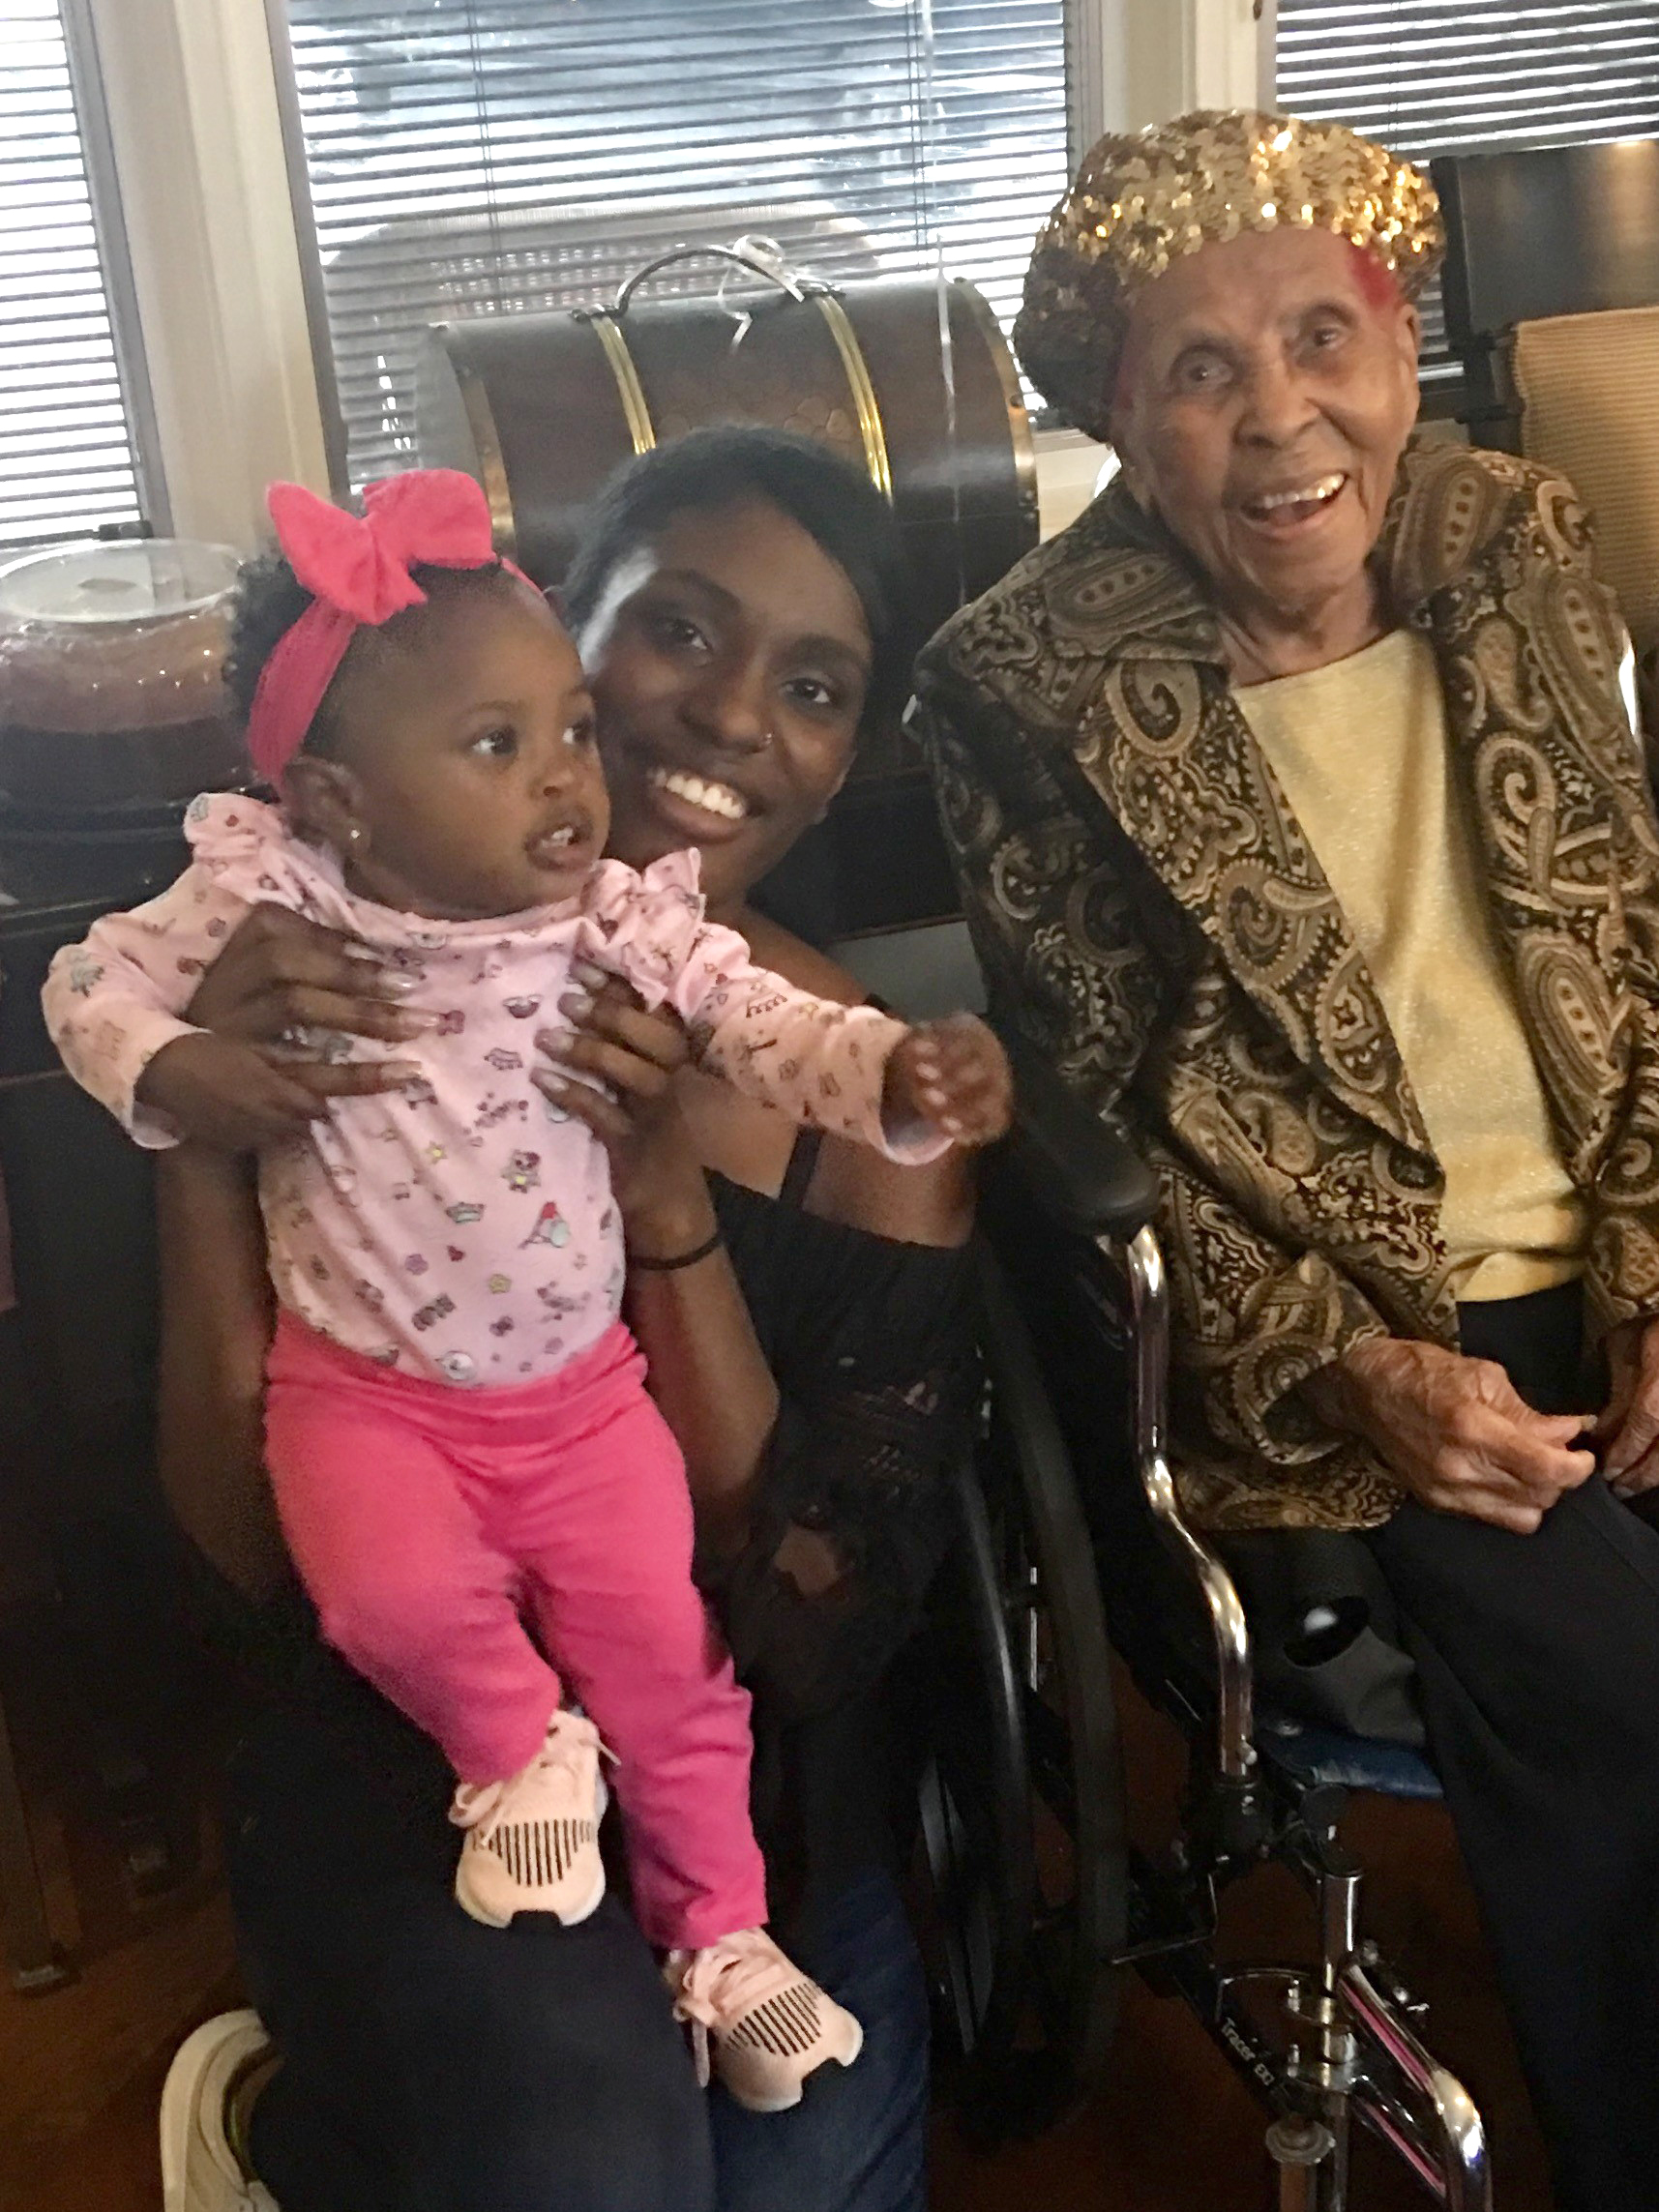 PHOTO: Lena Hall of Louisville, Kentucky celebrated her 105th birthday on Sunday with great-great-great-granddaughter, Taliyah.